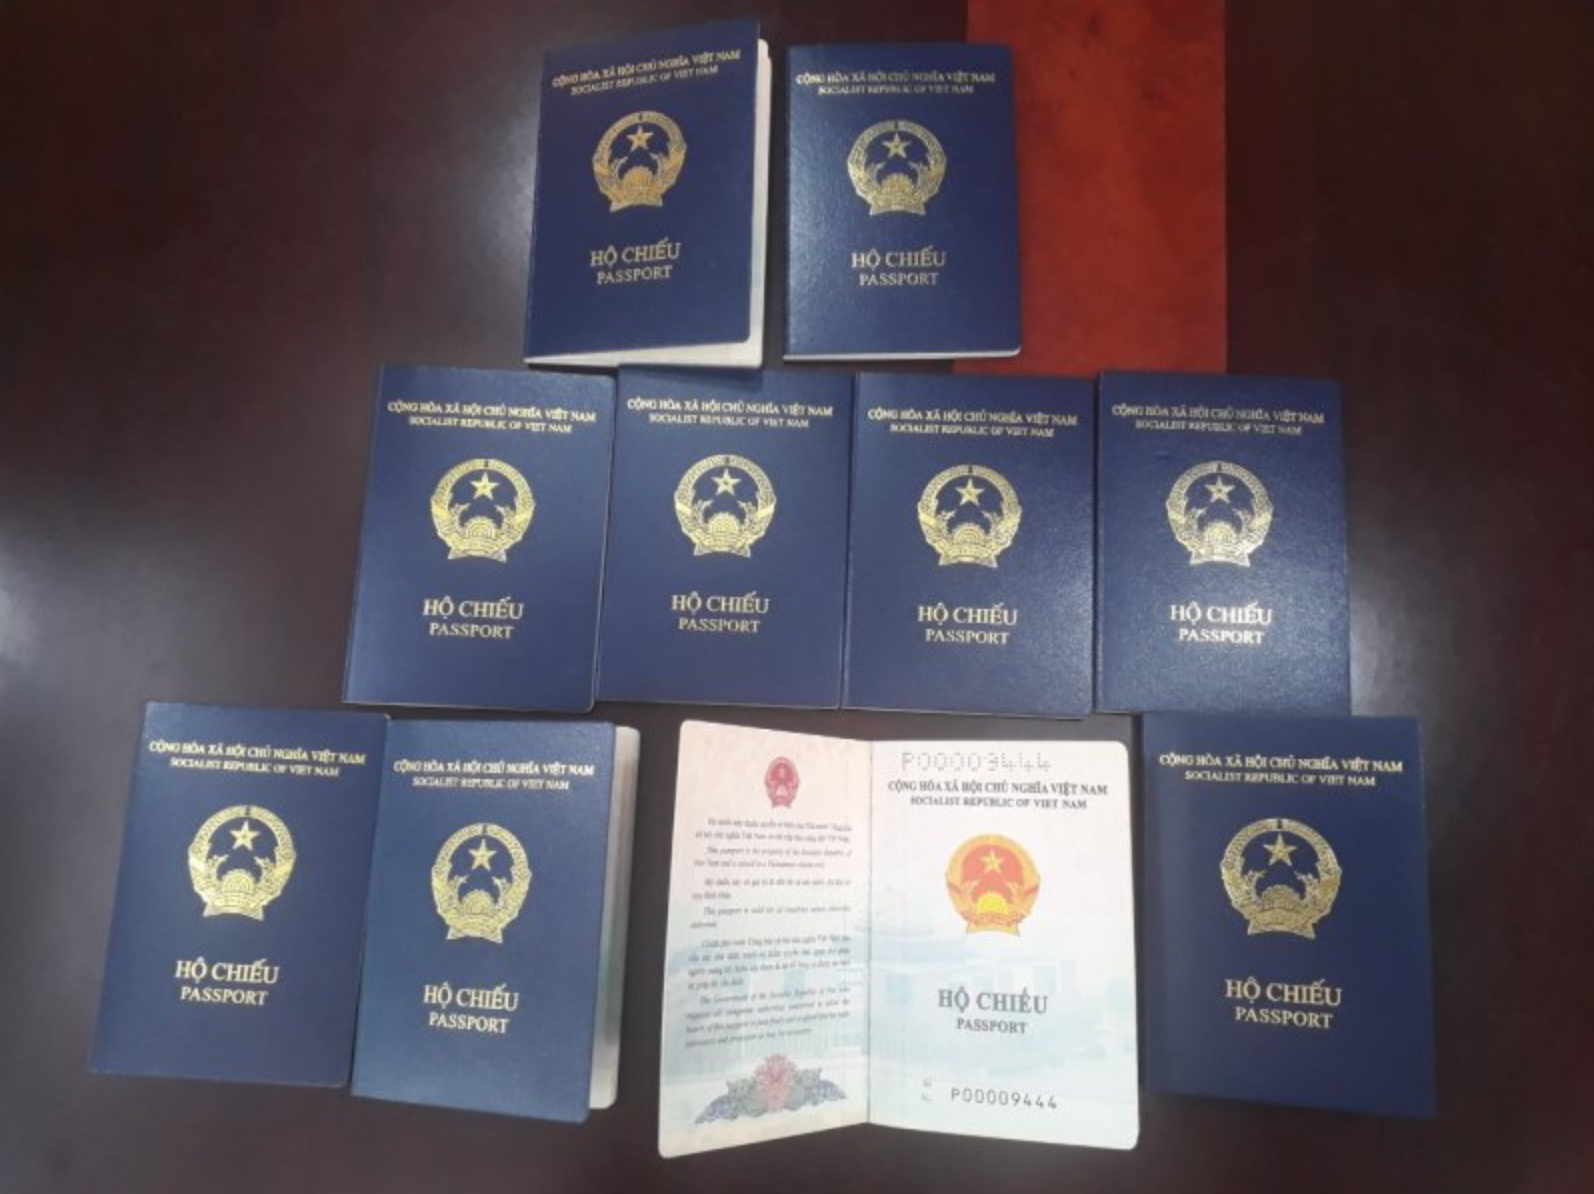 Vietnam’s new passport not accepted by German immigration officials